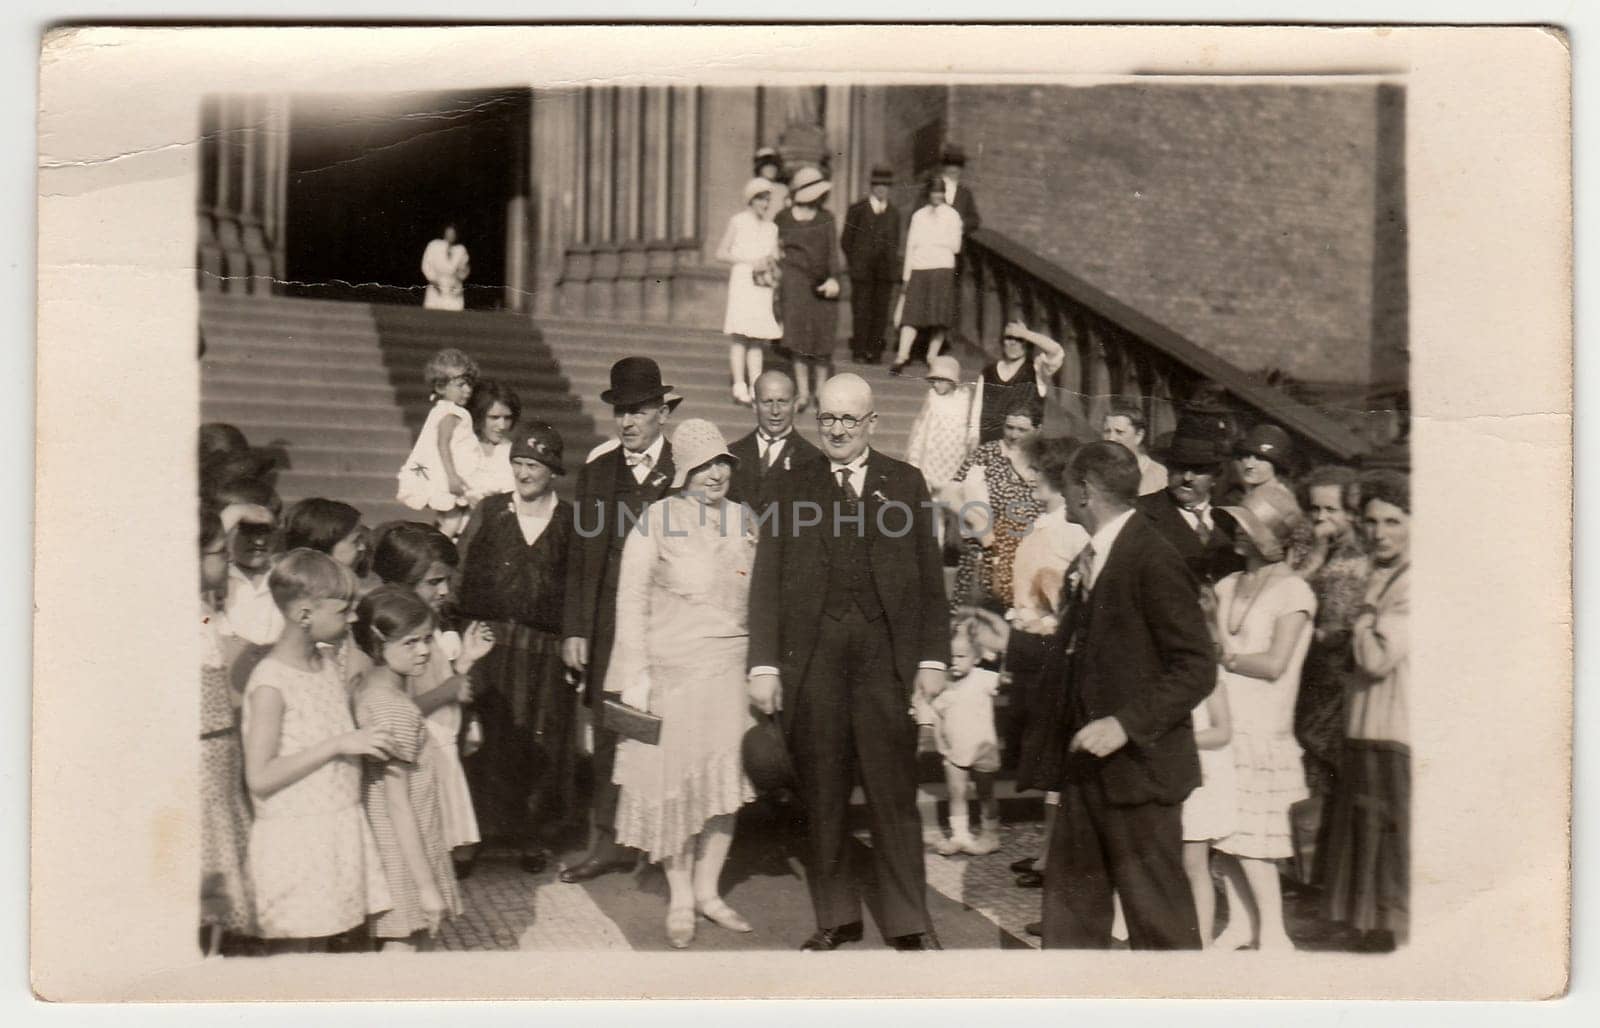 PRAGUE, THE CZECHOSLOVAK REPUBLIC - JUNE 28, 1930: Vintage photo shows elderly newlyweds in front of church after wedding ceremony. Black white antique photography.